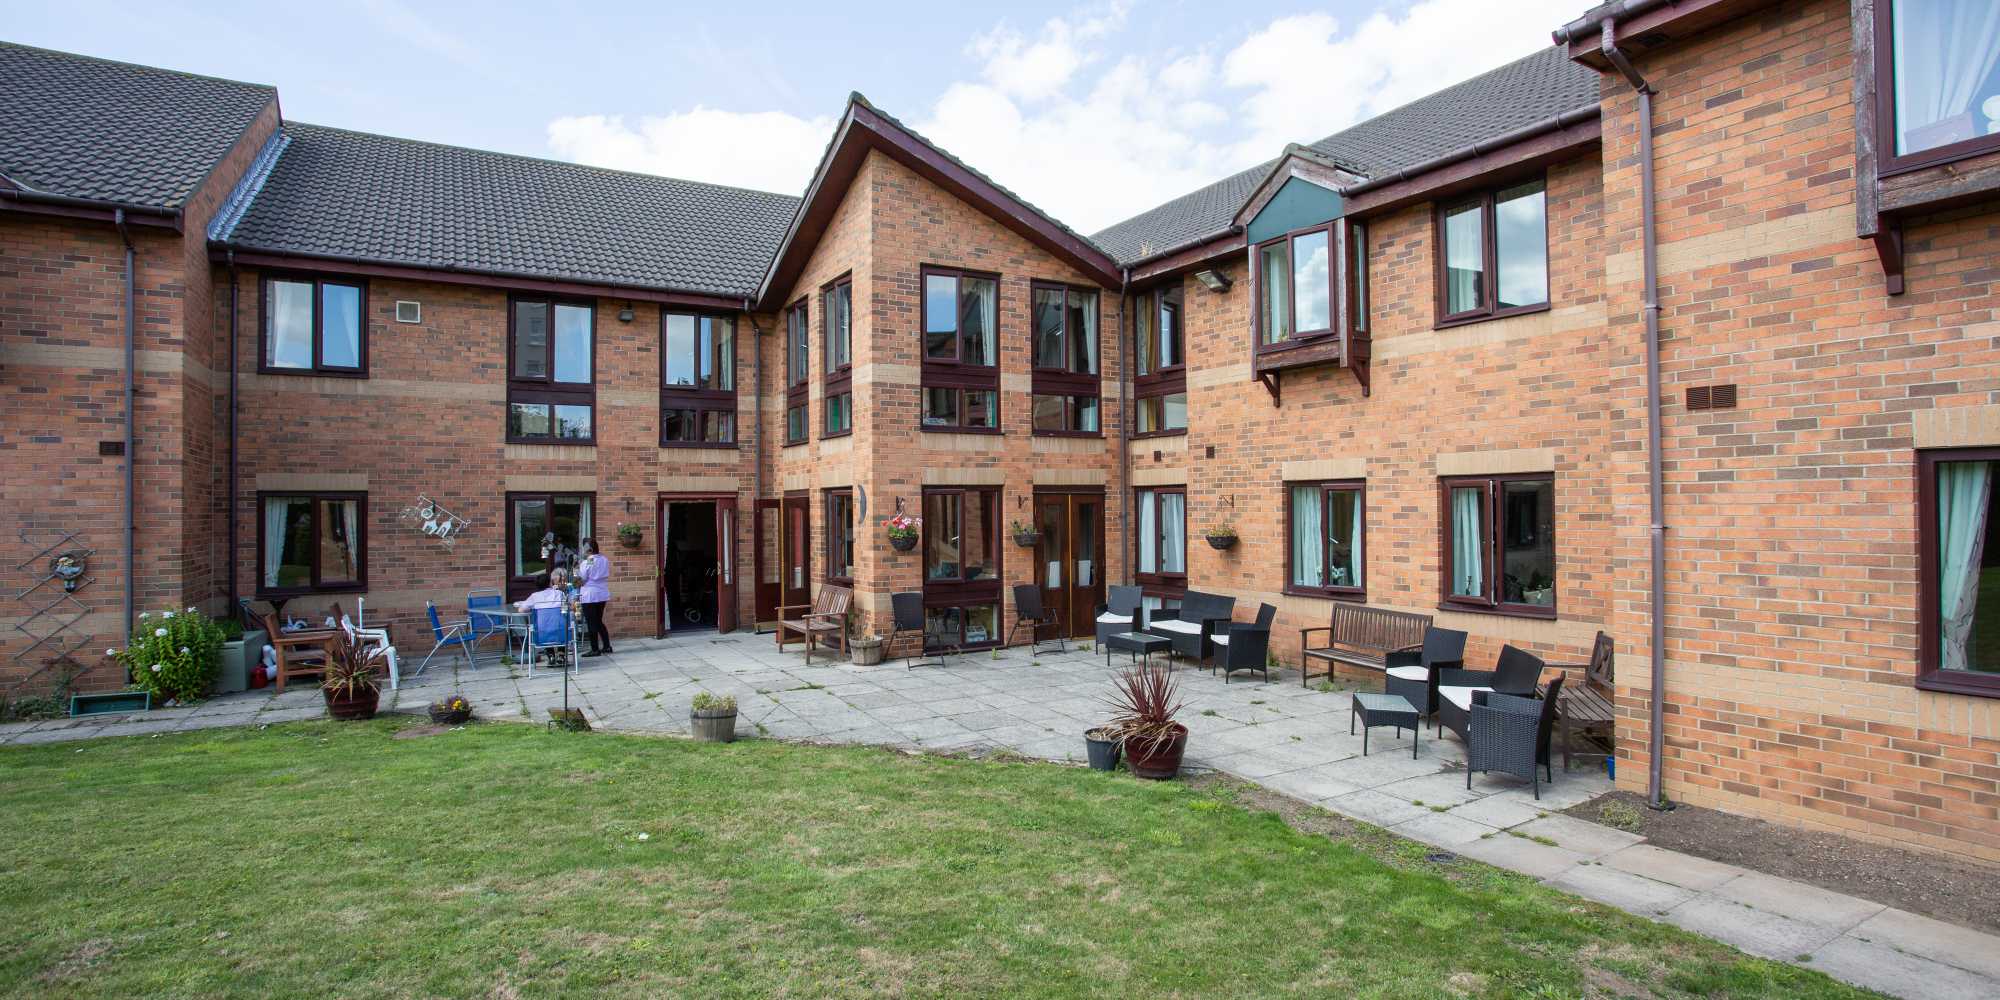 The Pros and Cons of Dementia Care Homes in Leicester